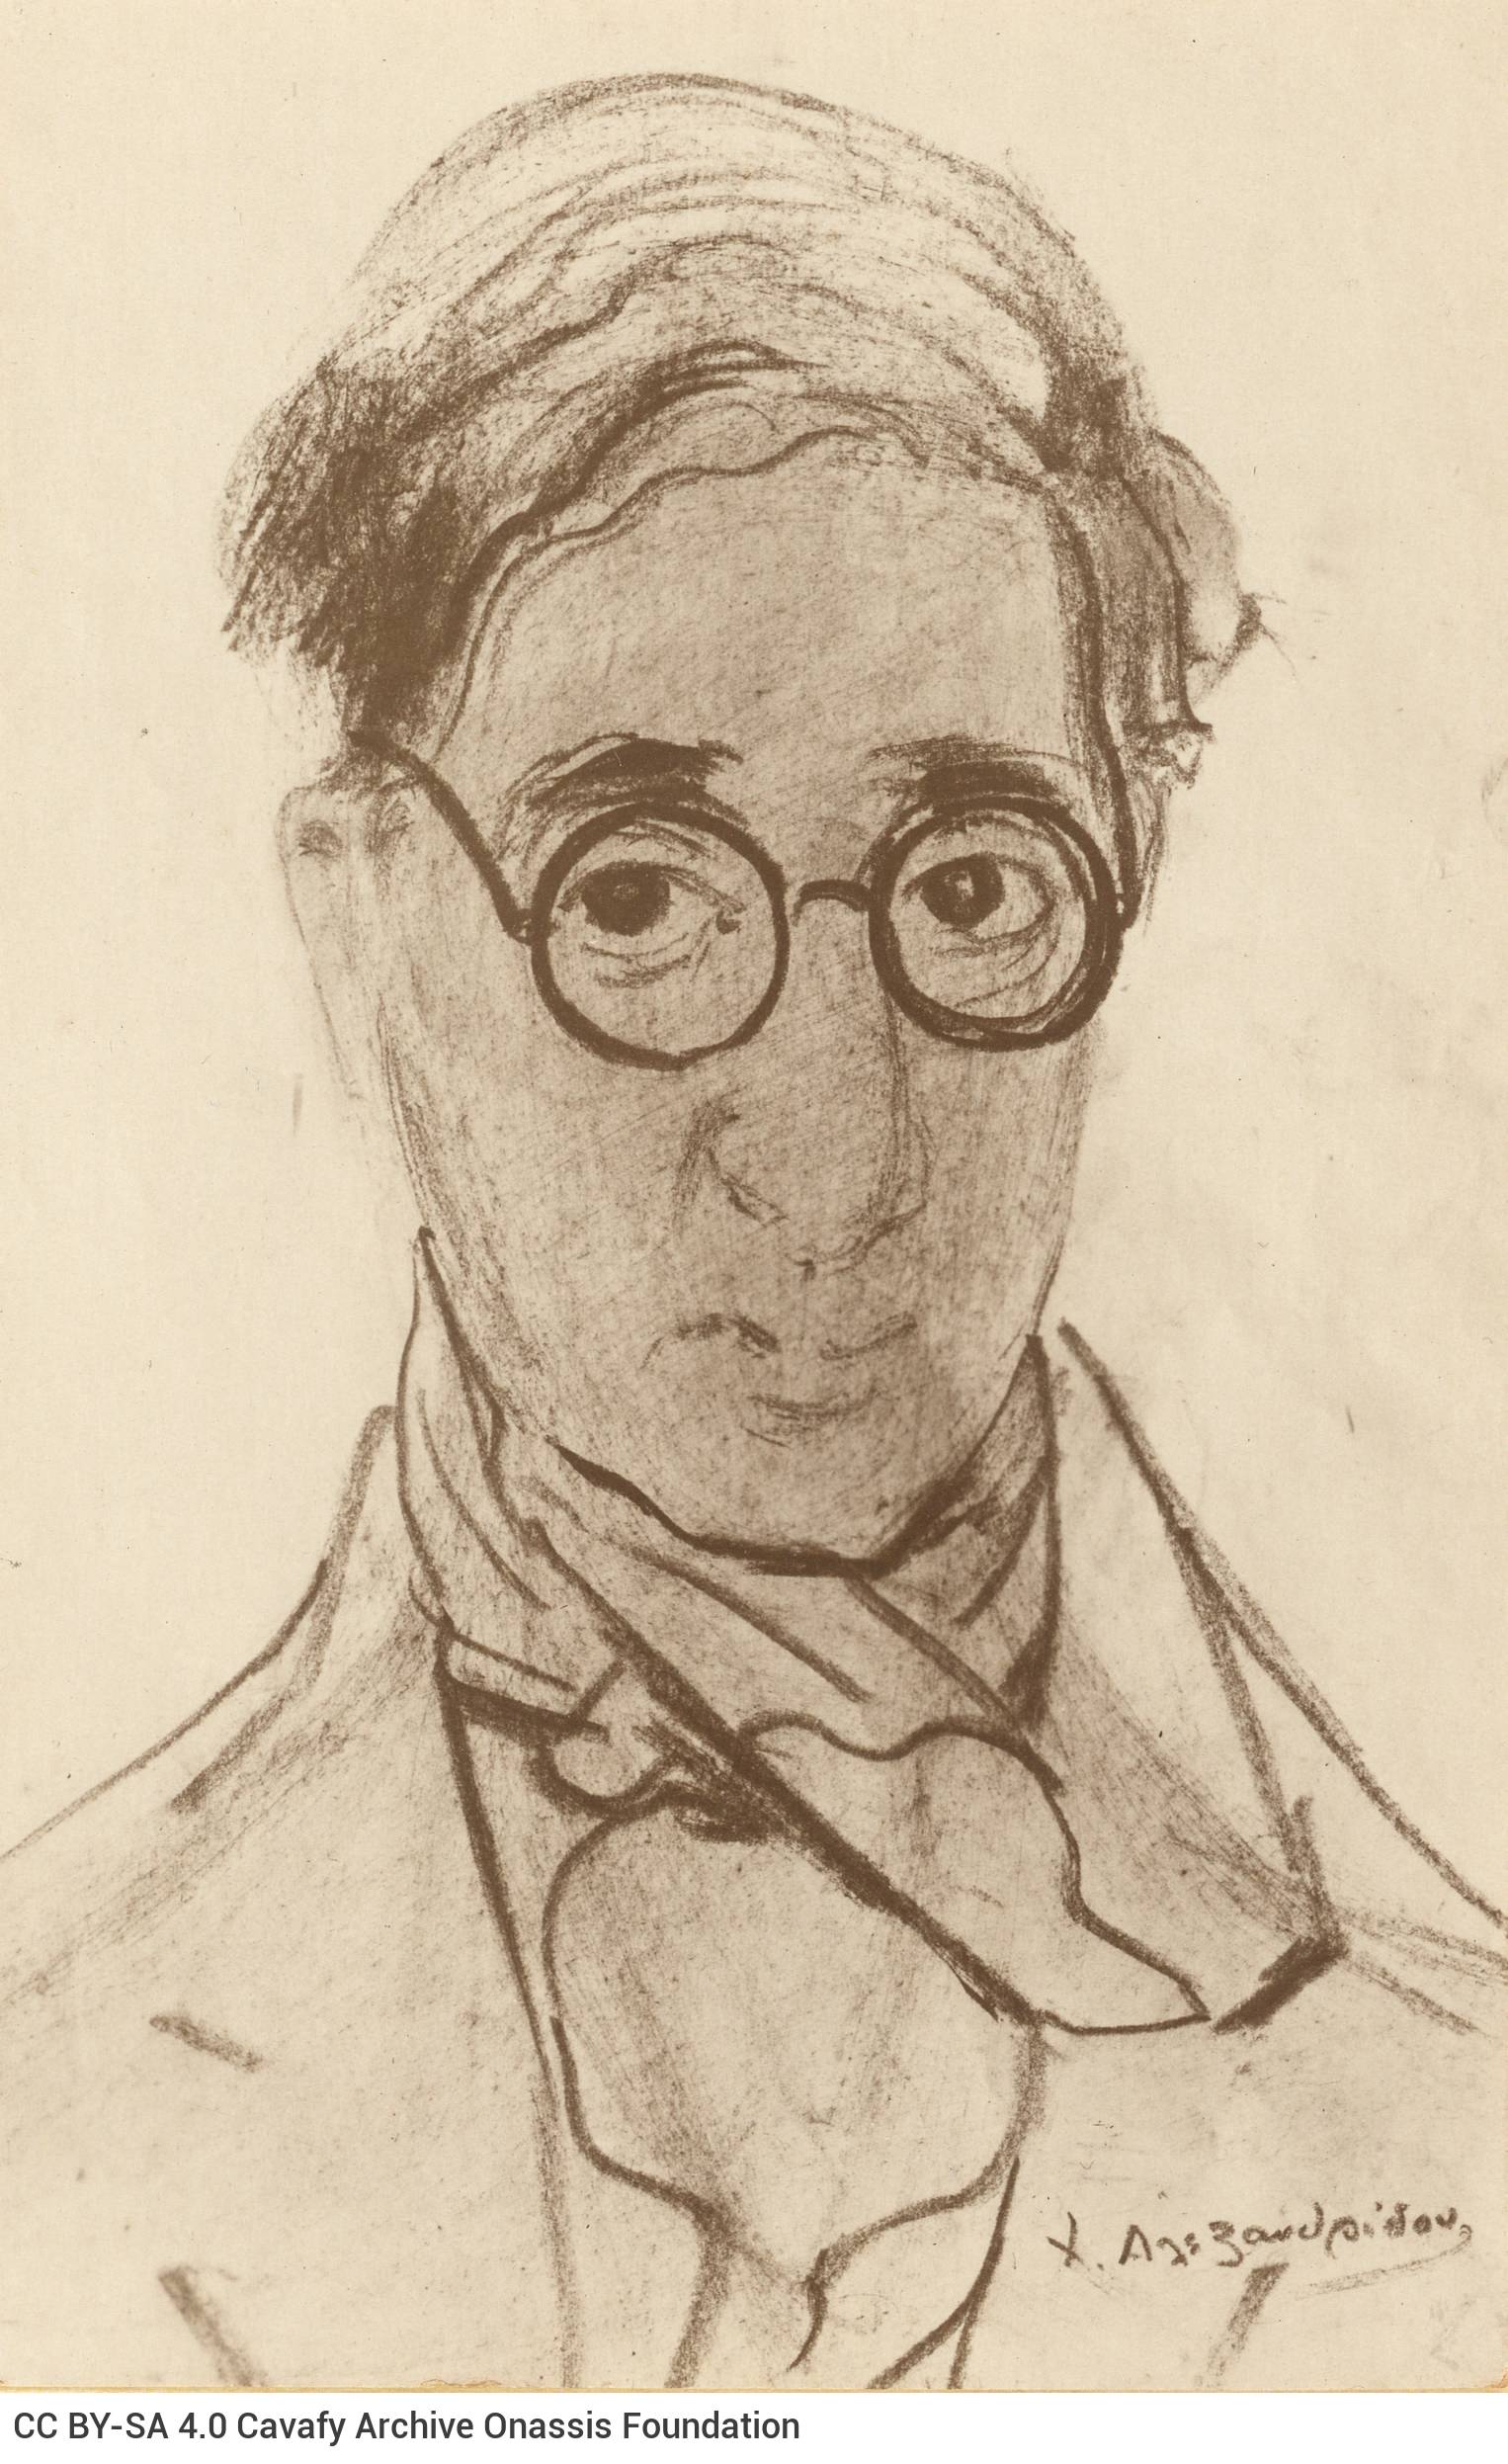 Two copies (perhaps lithographs) of a portrait of Cavafy by Charikleia Alexandridou Stefanopoulou. Third reproduction of the 